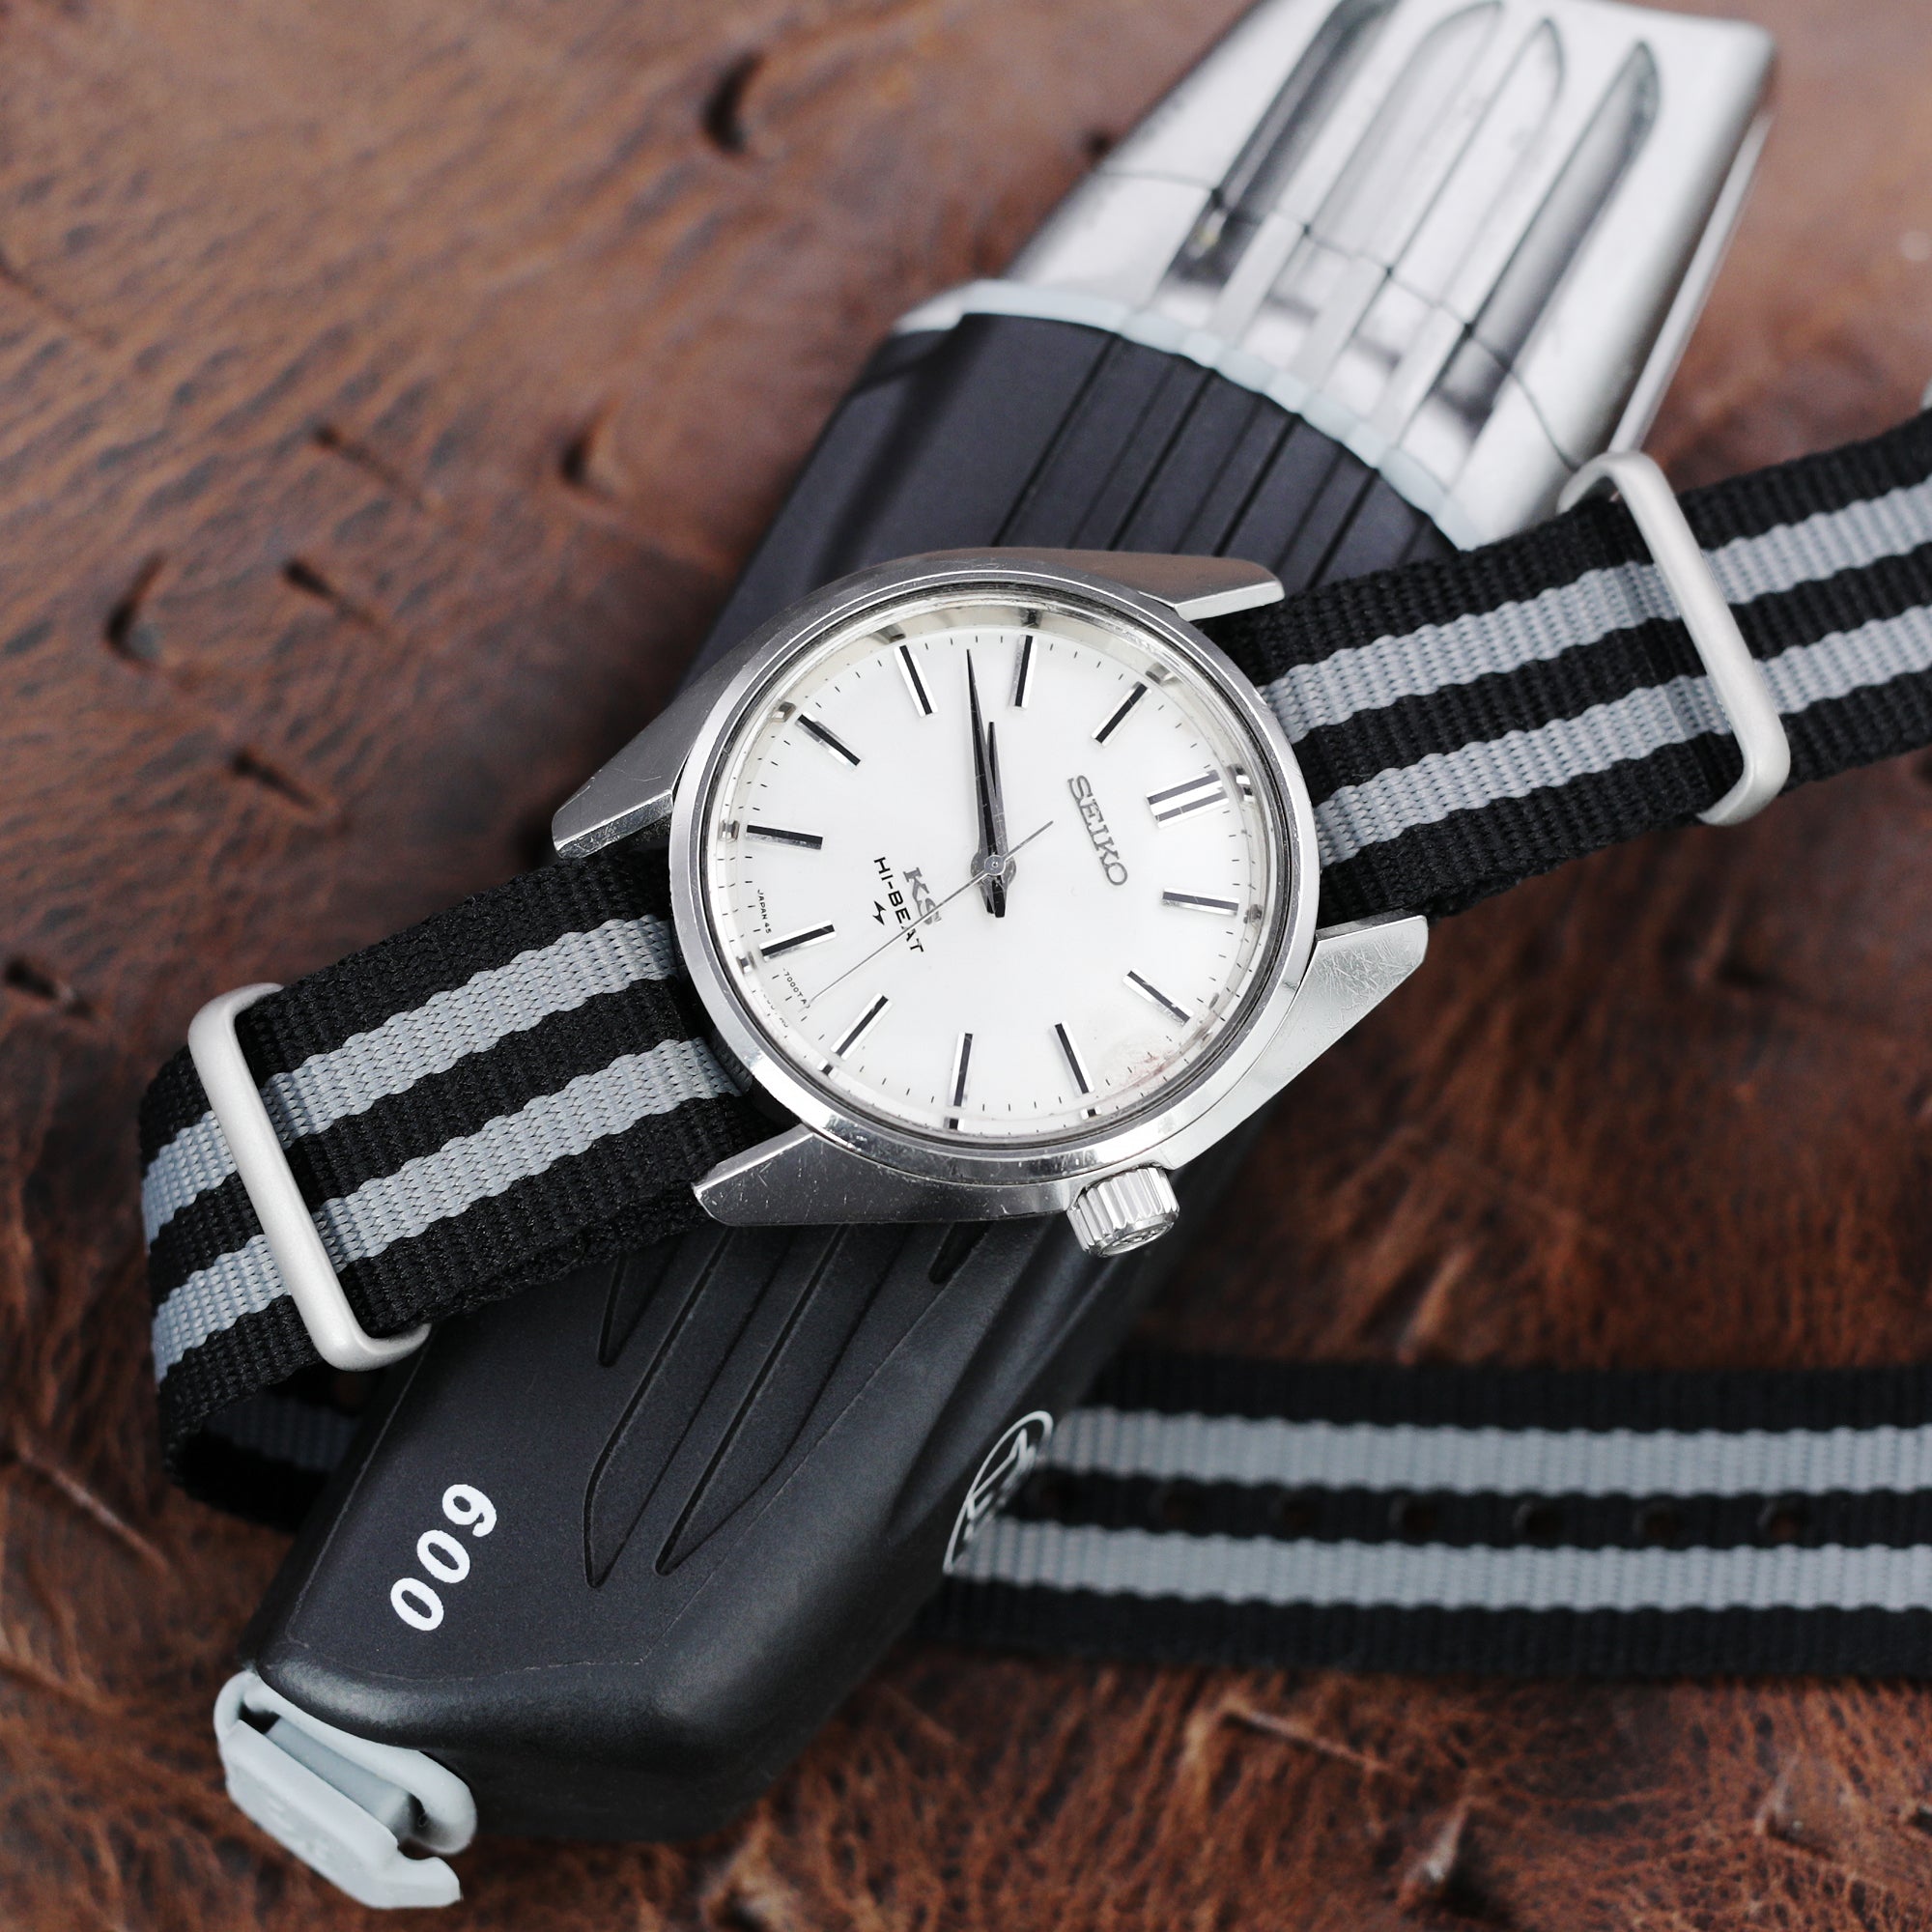 MiLTAT 18mm G10 military watch strap ballistic nylon armband Brushed Double Black & Grey Stripes Strapcode Watch Bands